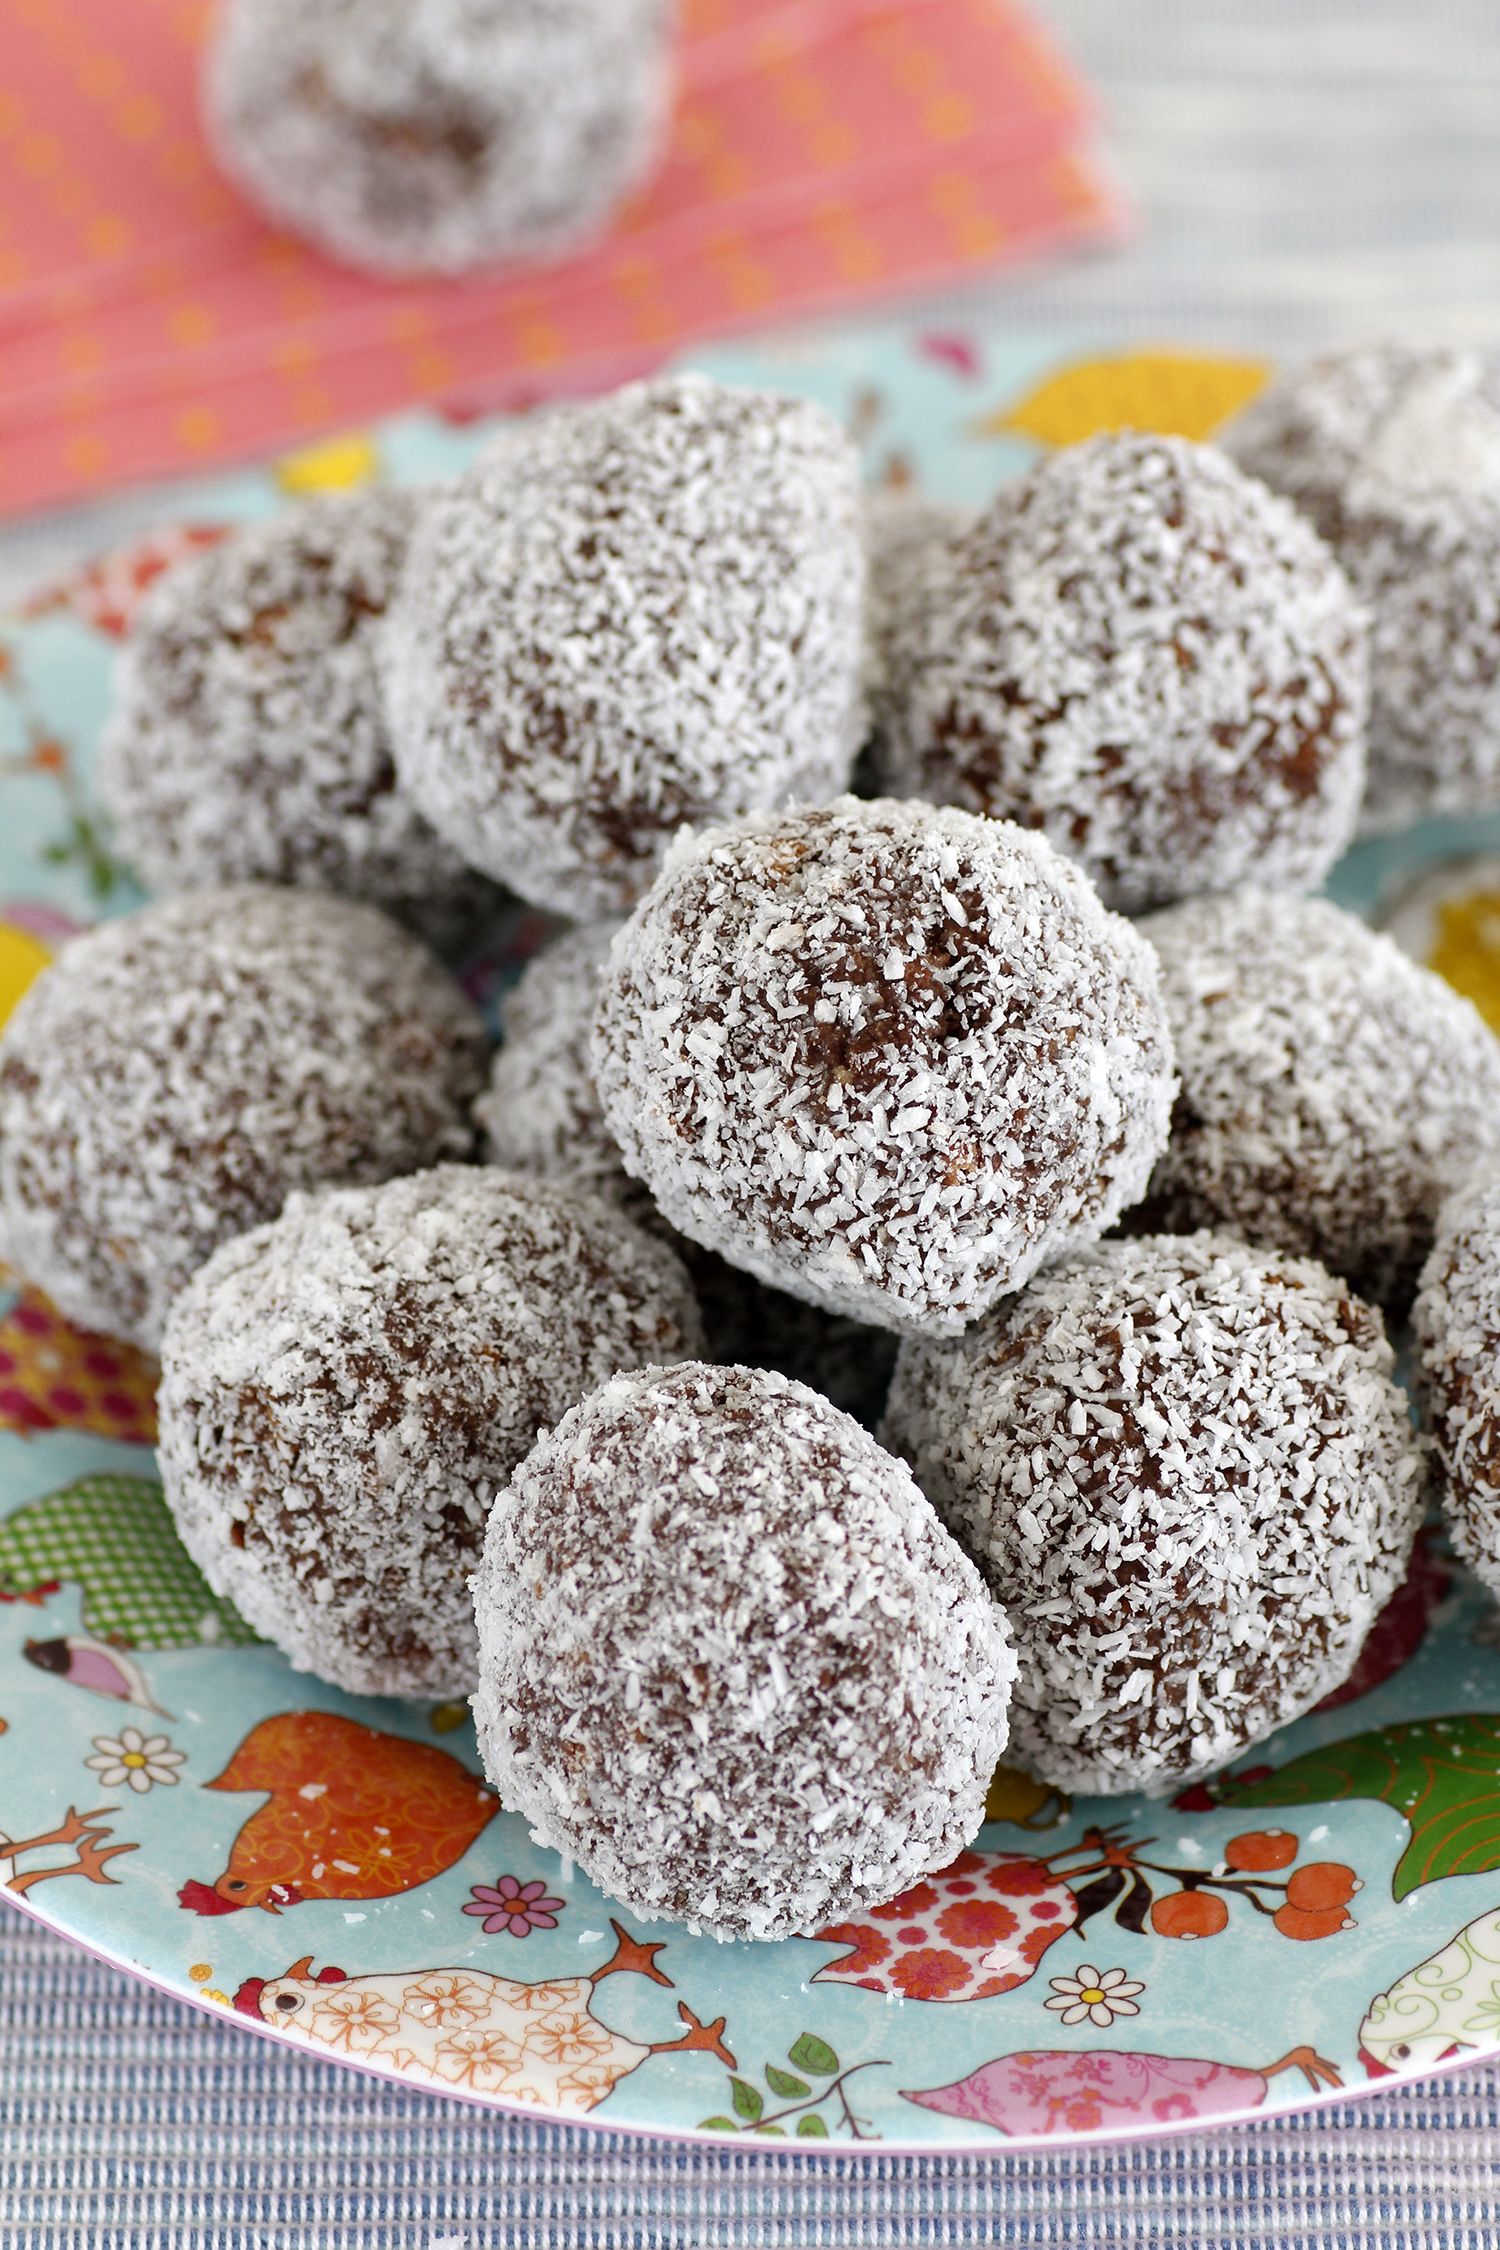 Nostalgic Chocolate Snowballs with Candy Surprise